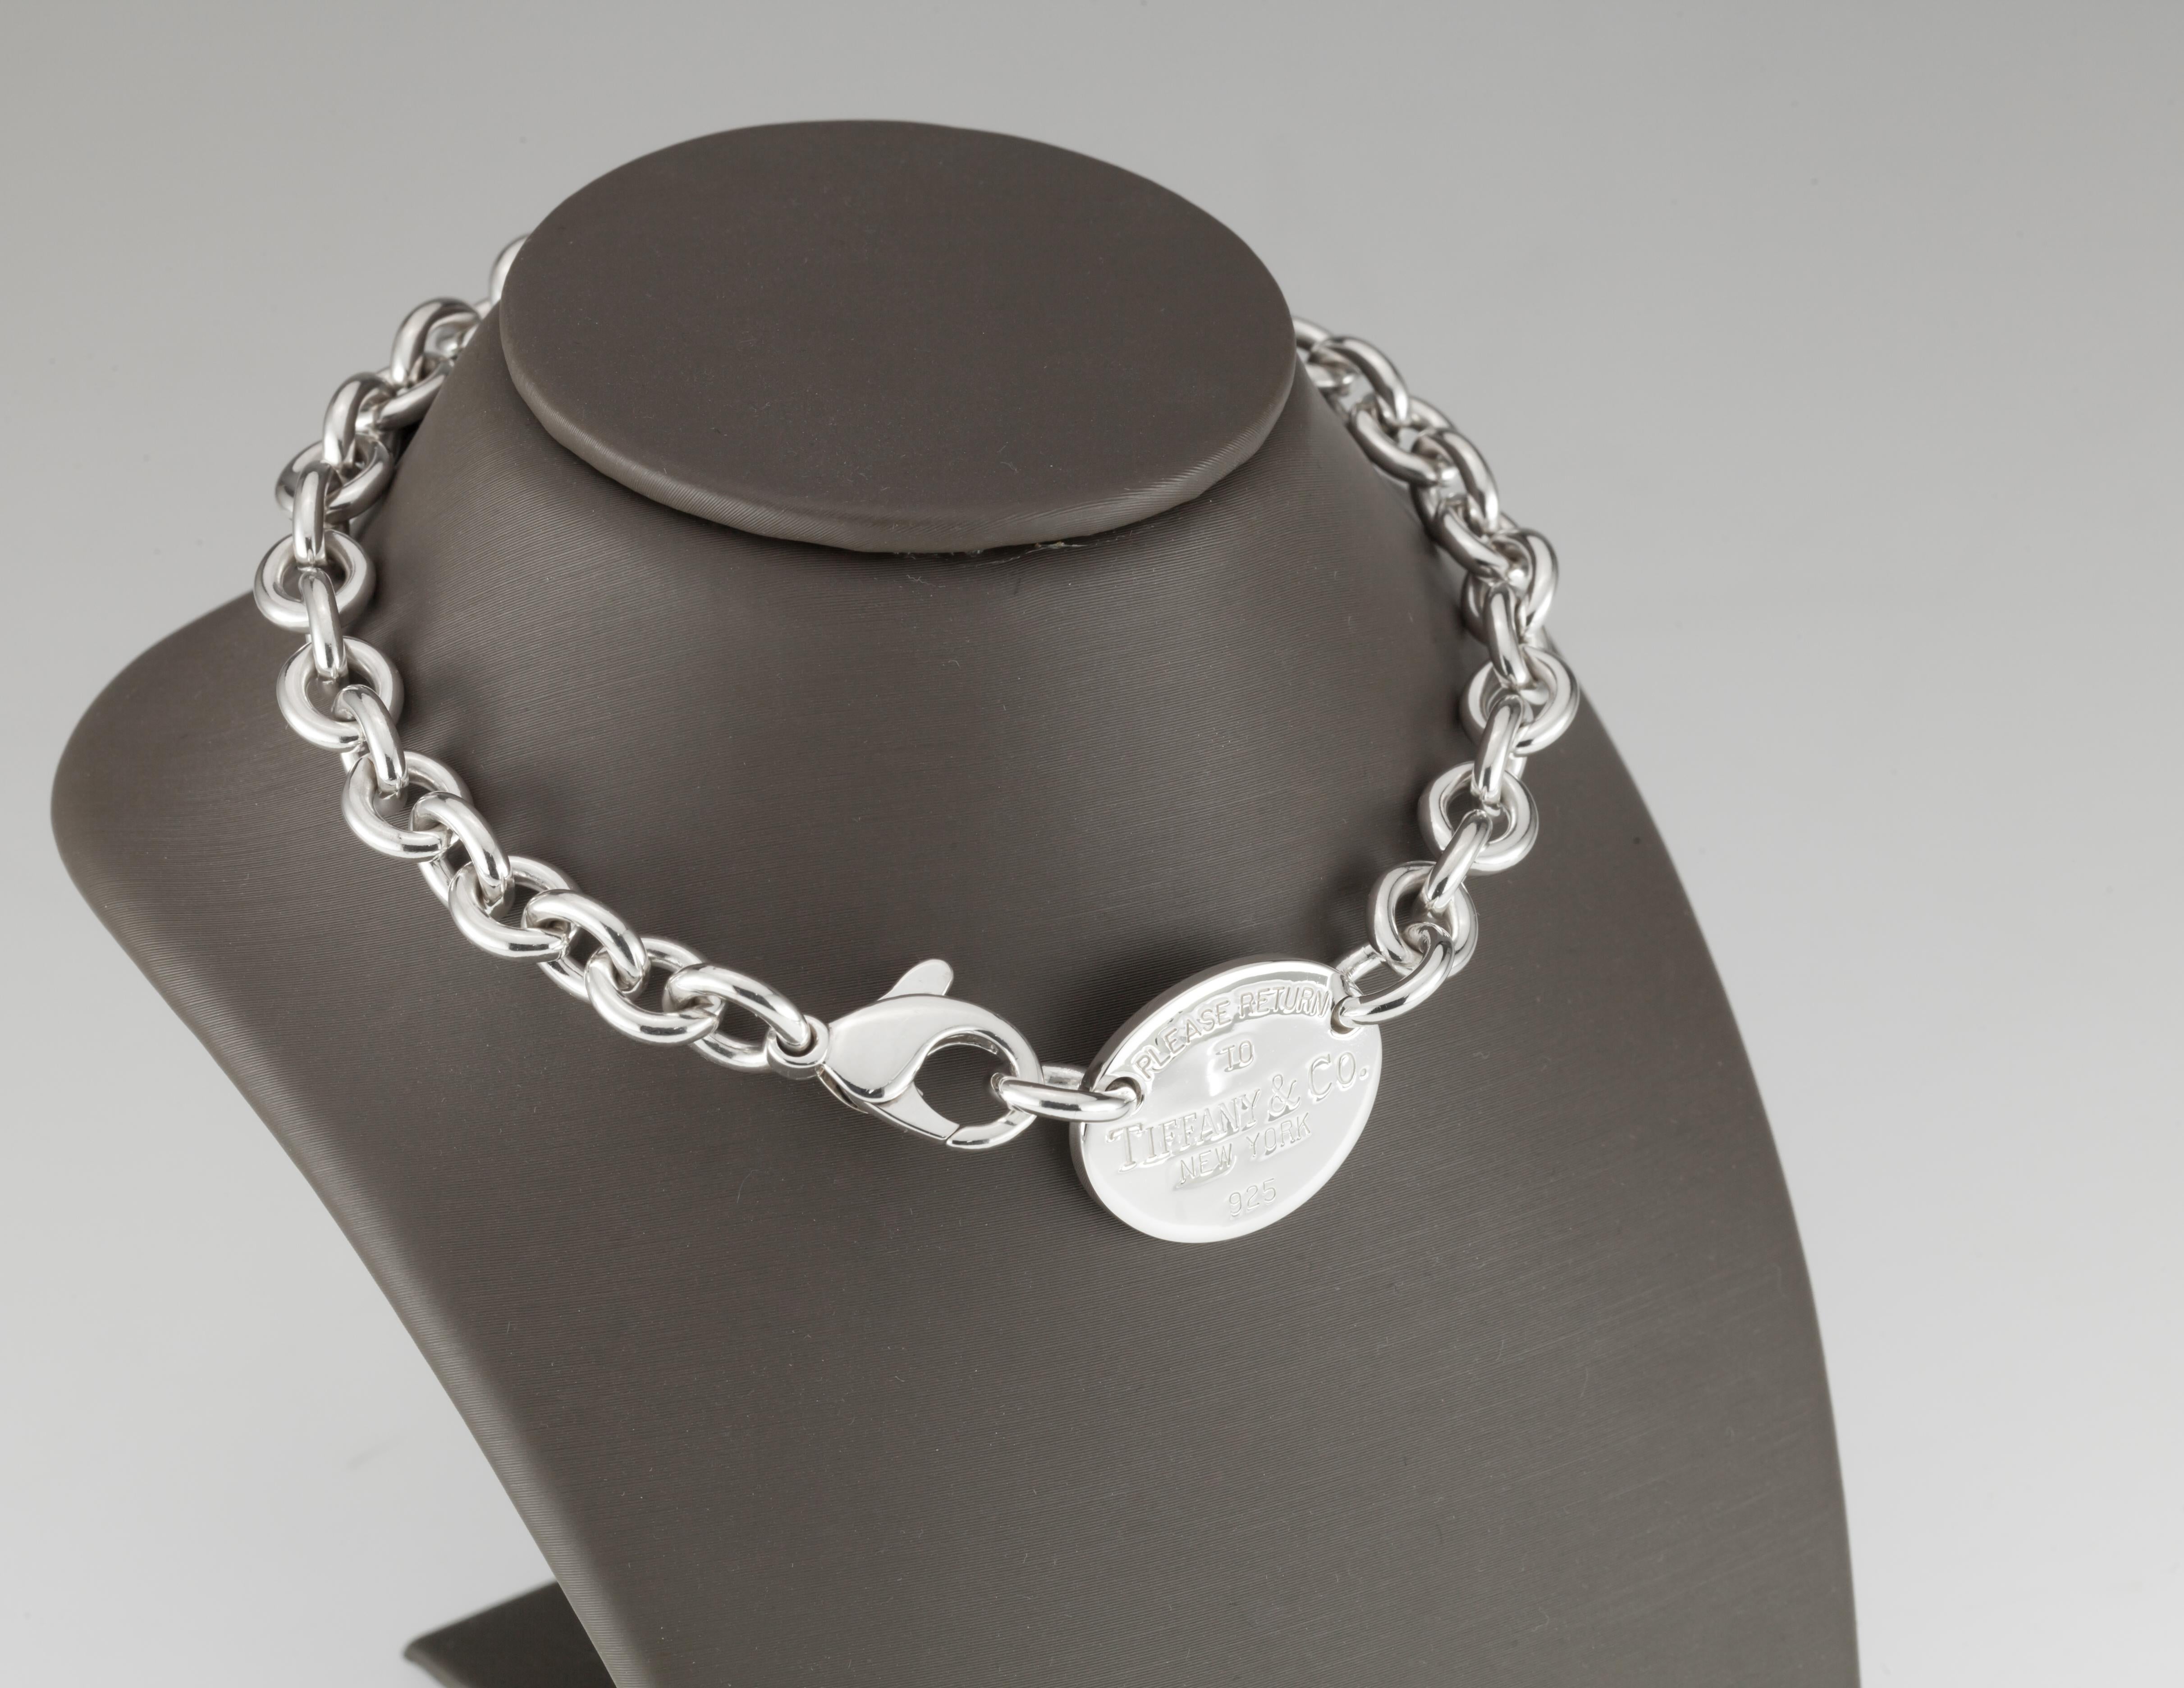 Gorgeous Tiffany Sterling Silver Necklace
Oval 